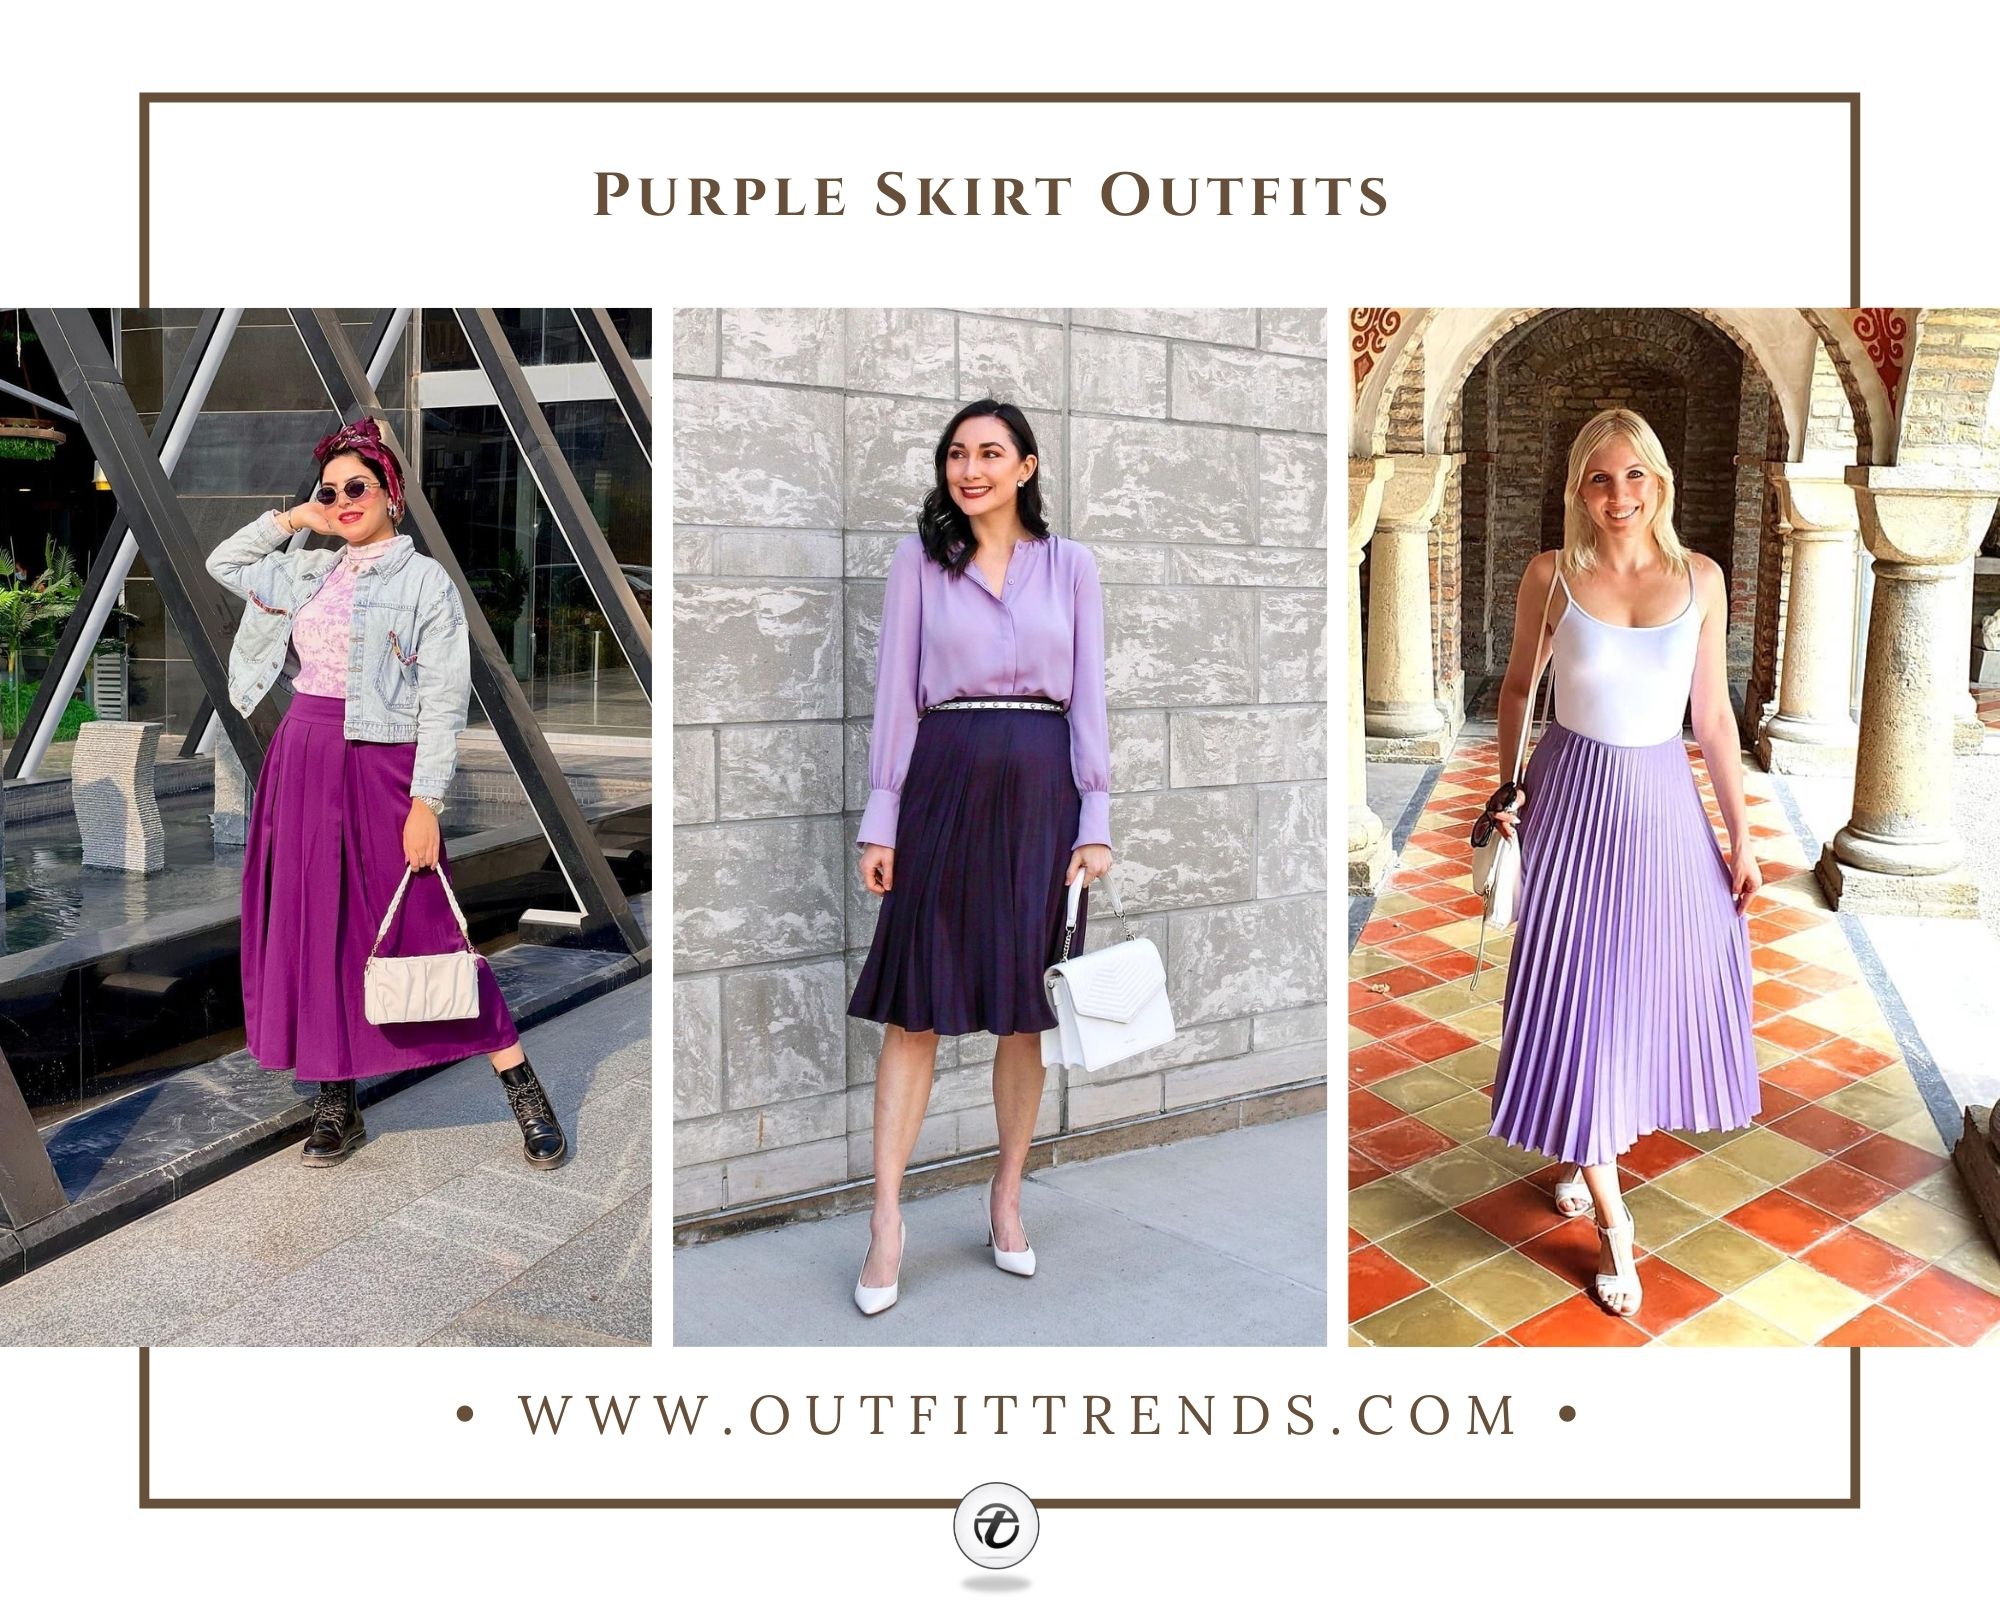 Purple Skirt Outfits 25 Ways To Style A Purple Skirt